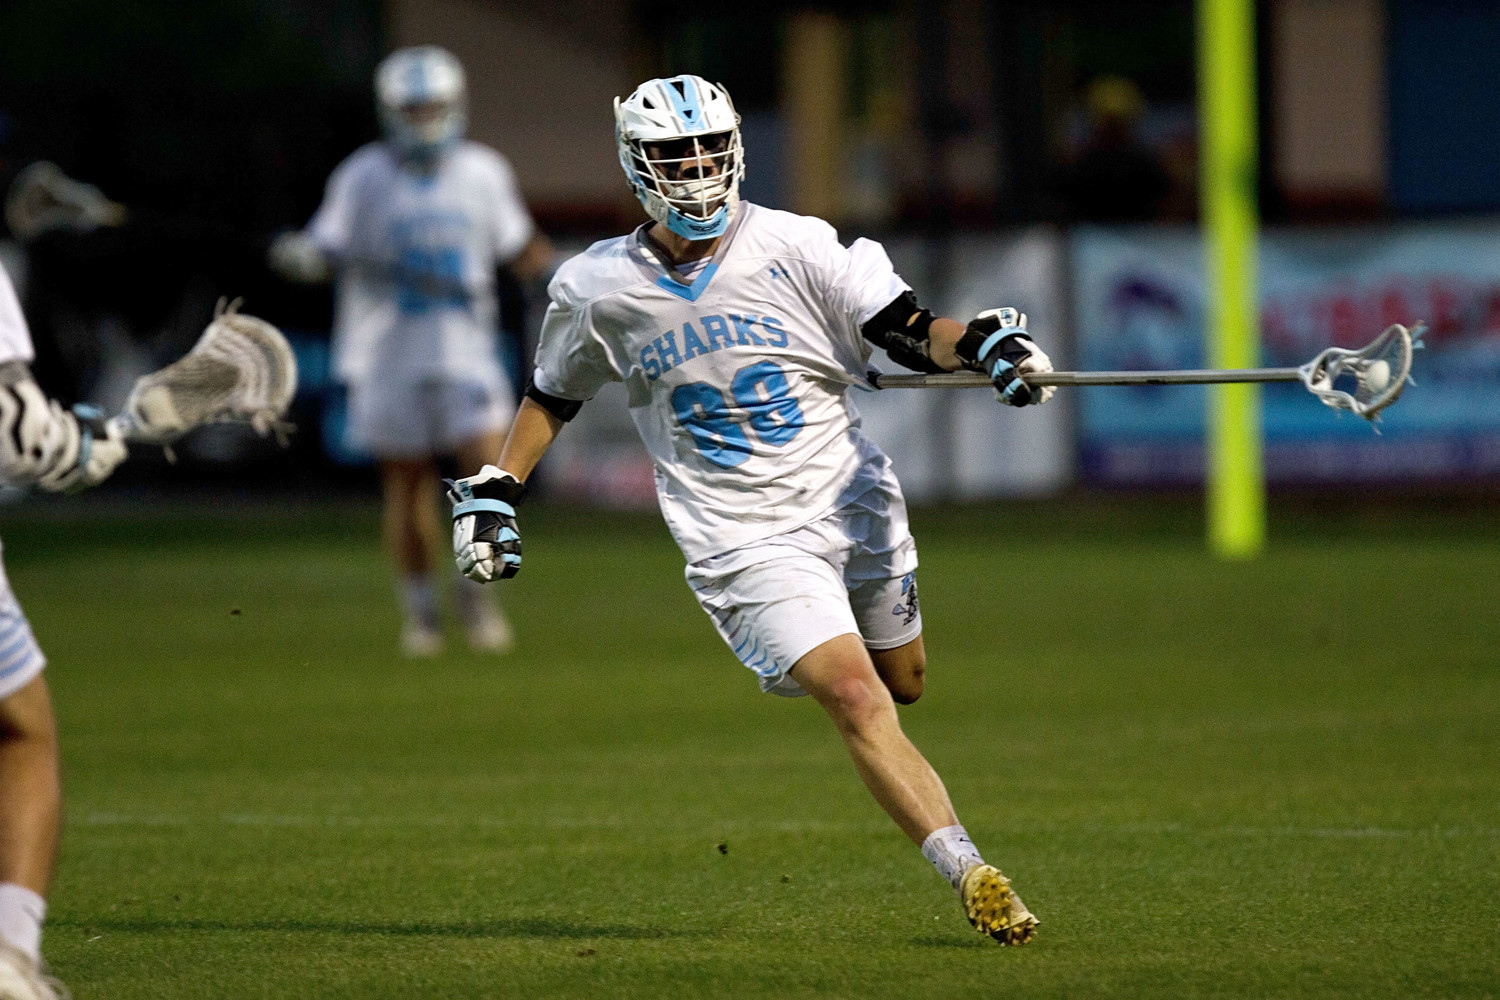 Ponte Vedra defender Andrew Bray pushes the ball up field.